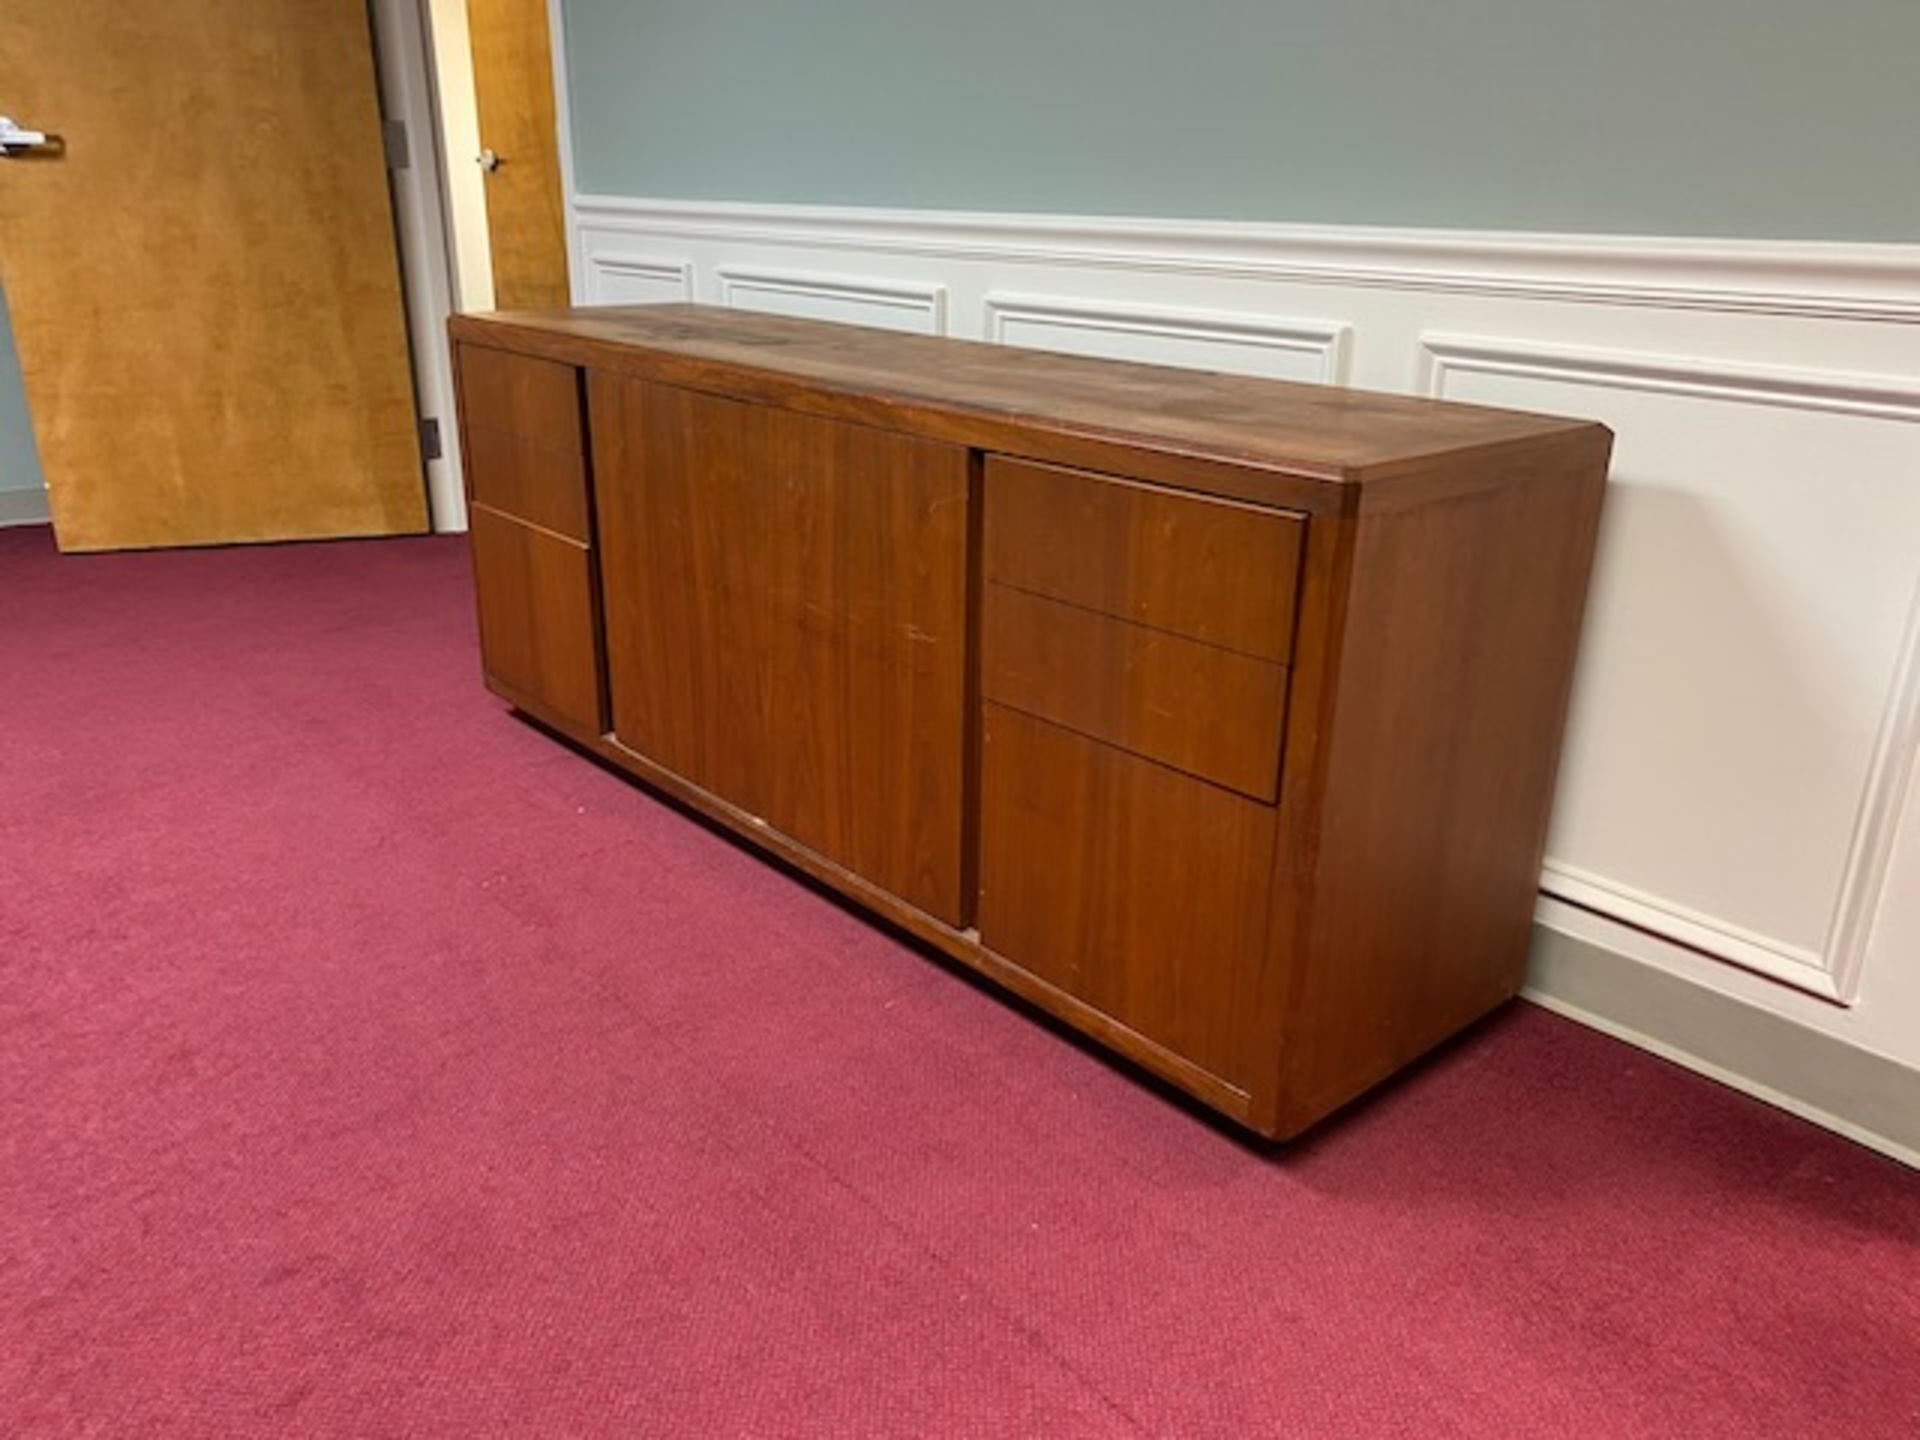 Conference Room Table 48" x 12'4" W/ credenza - Image 2 of 2